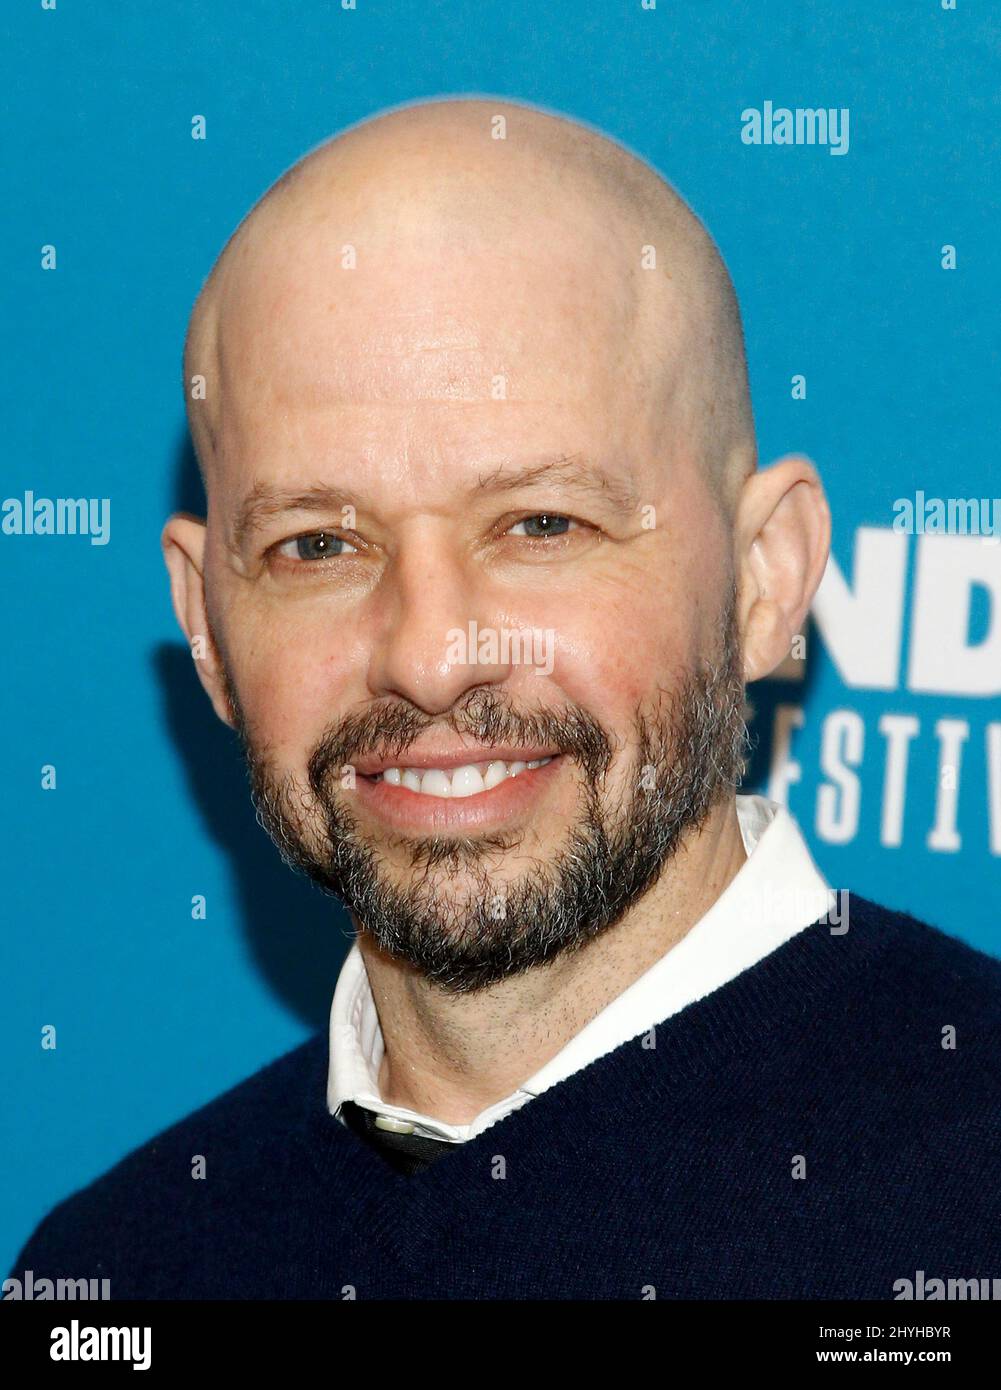 Jon Cryer at the premiere of 'Big Time Adolescence' during the 2019 Sundance Film Festival Stock Photo